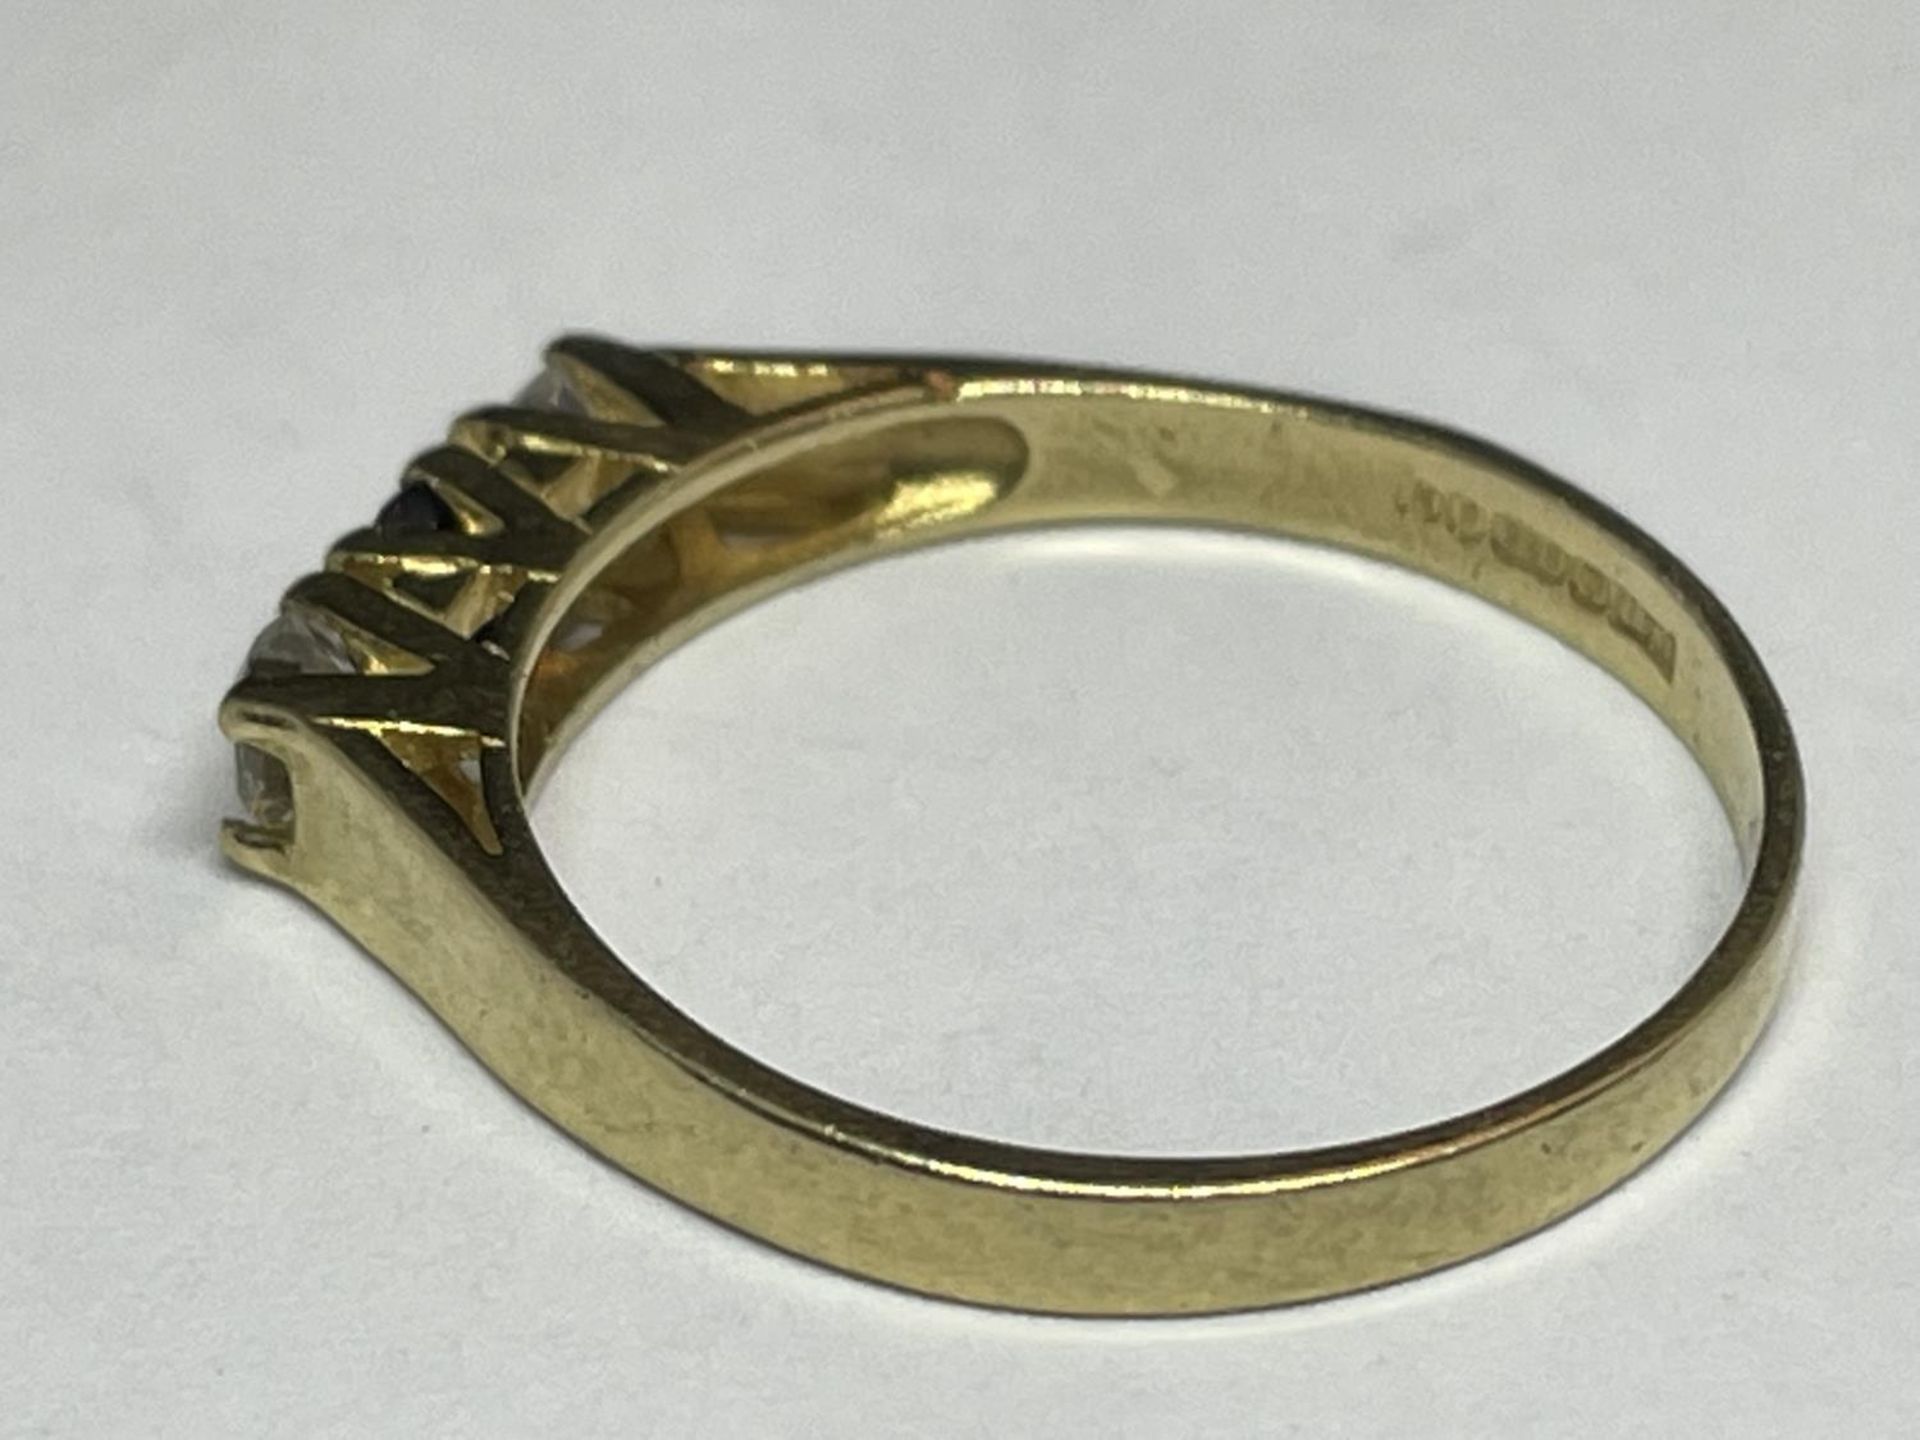 A 9 CARAT GOLD RING WITH THREE IN LINE STONES TO INCLUDE A CENTRE SAPPHIRE AND TWO CUBIC ZIRCONIAS - Image 3 of 8